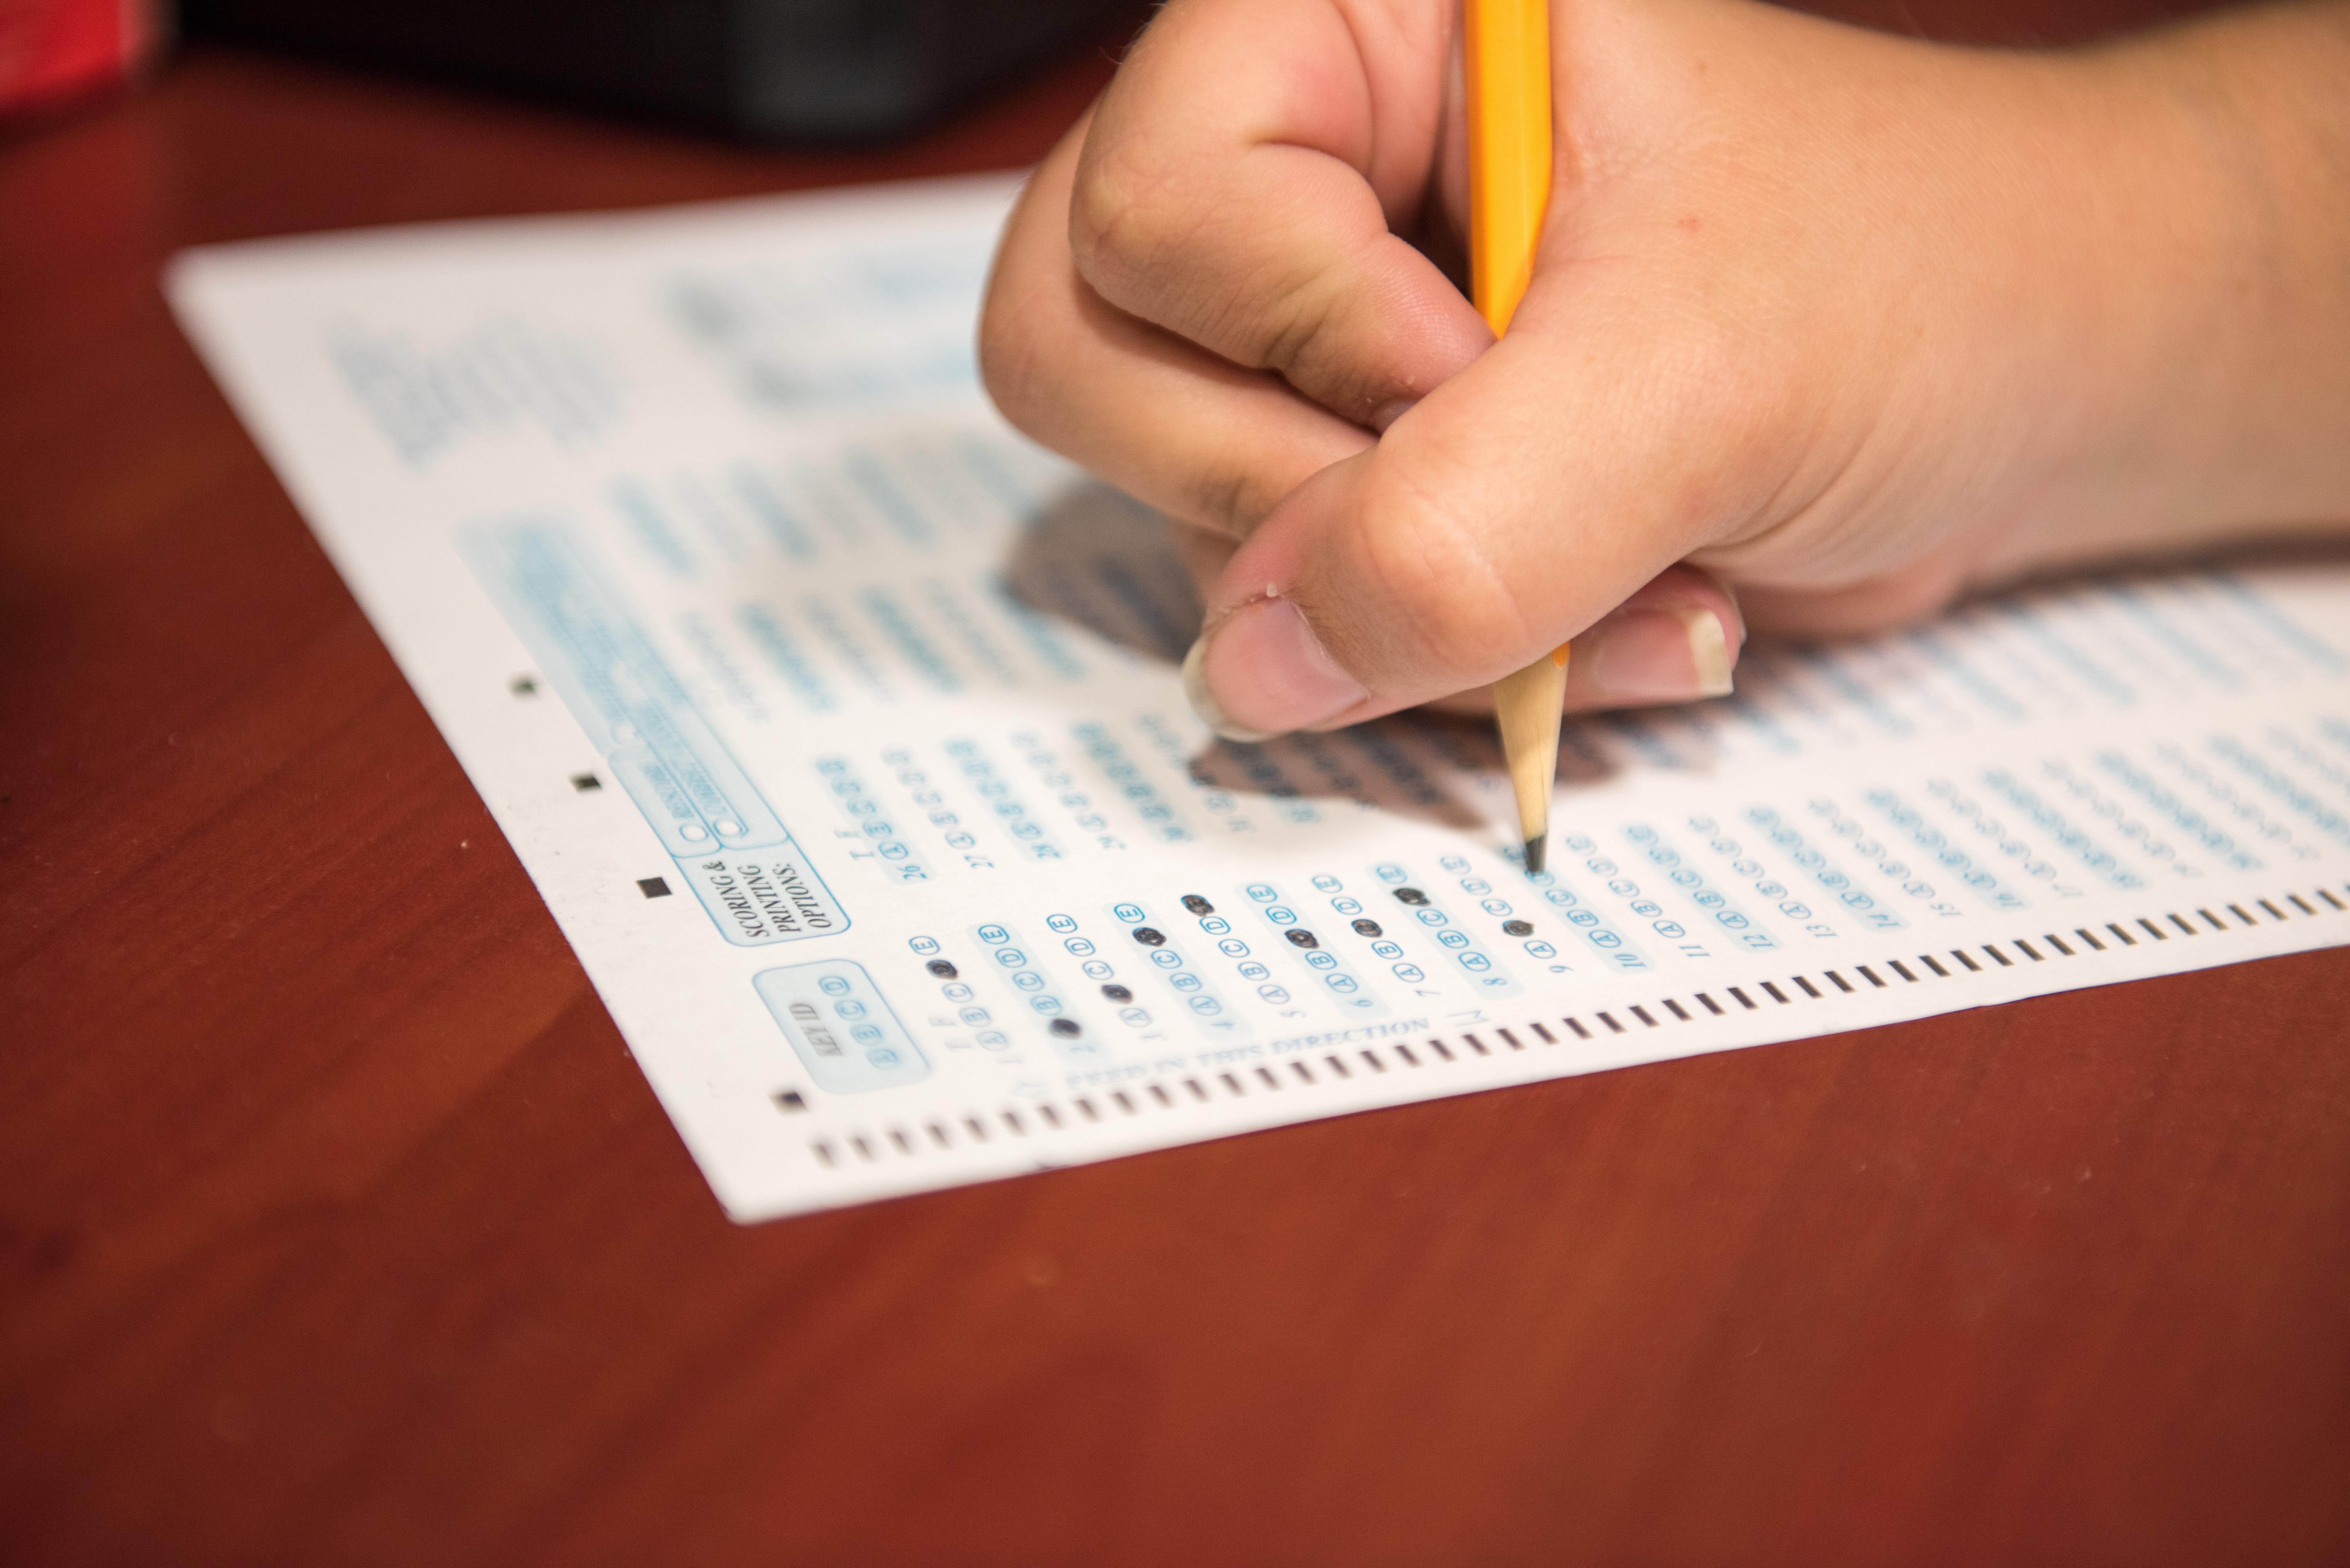 Opinion: Multiple choice tests are unfair and inaccurate